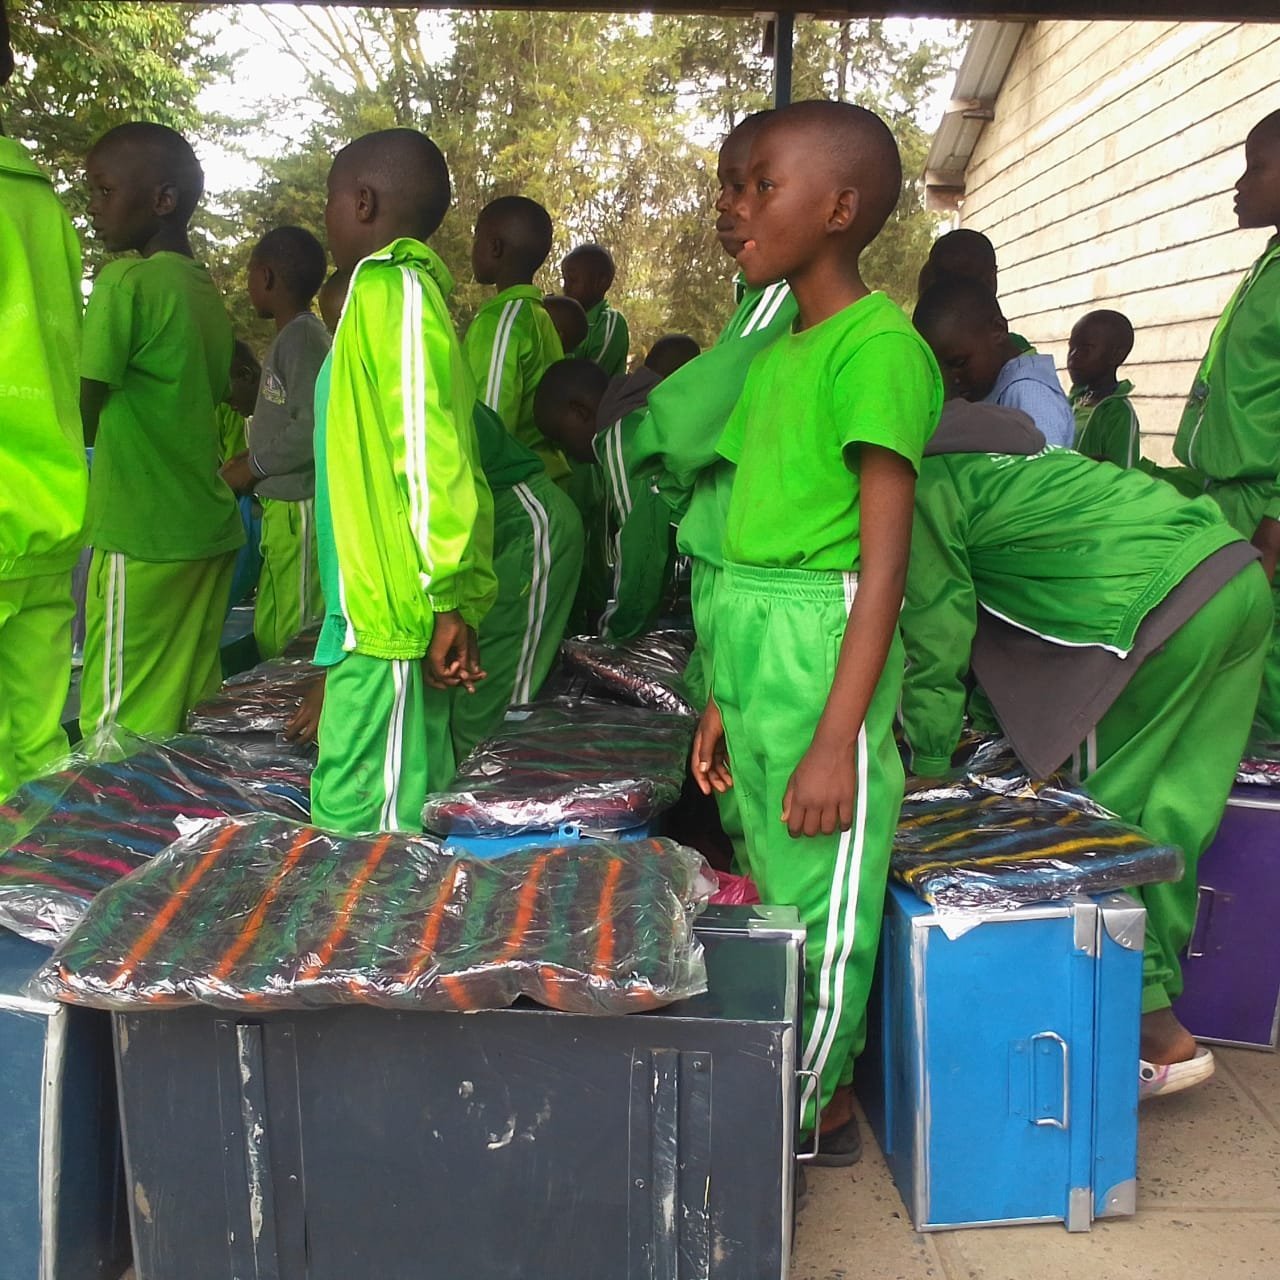 Students assembled with new trunks and blankets